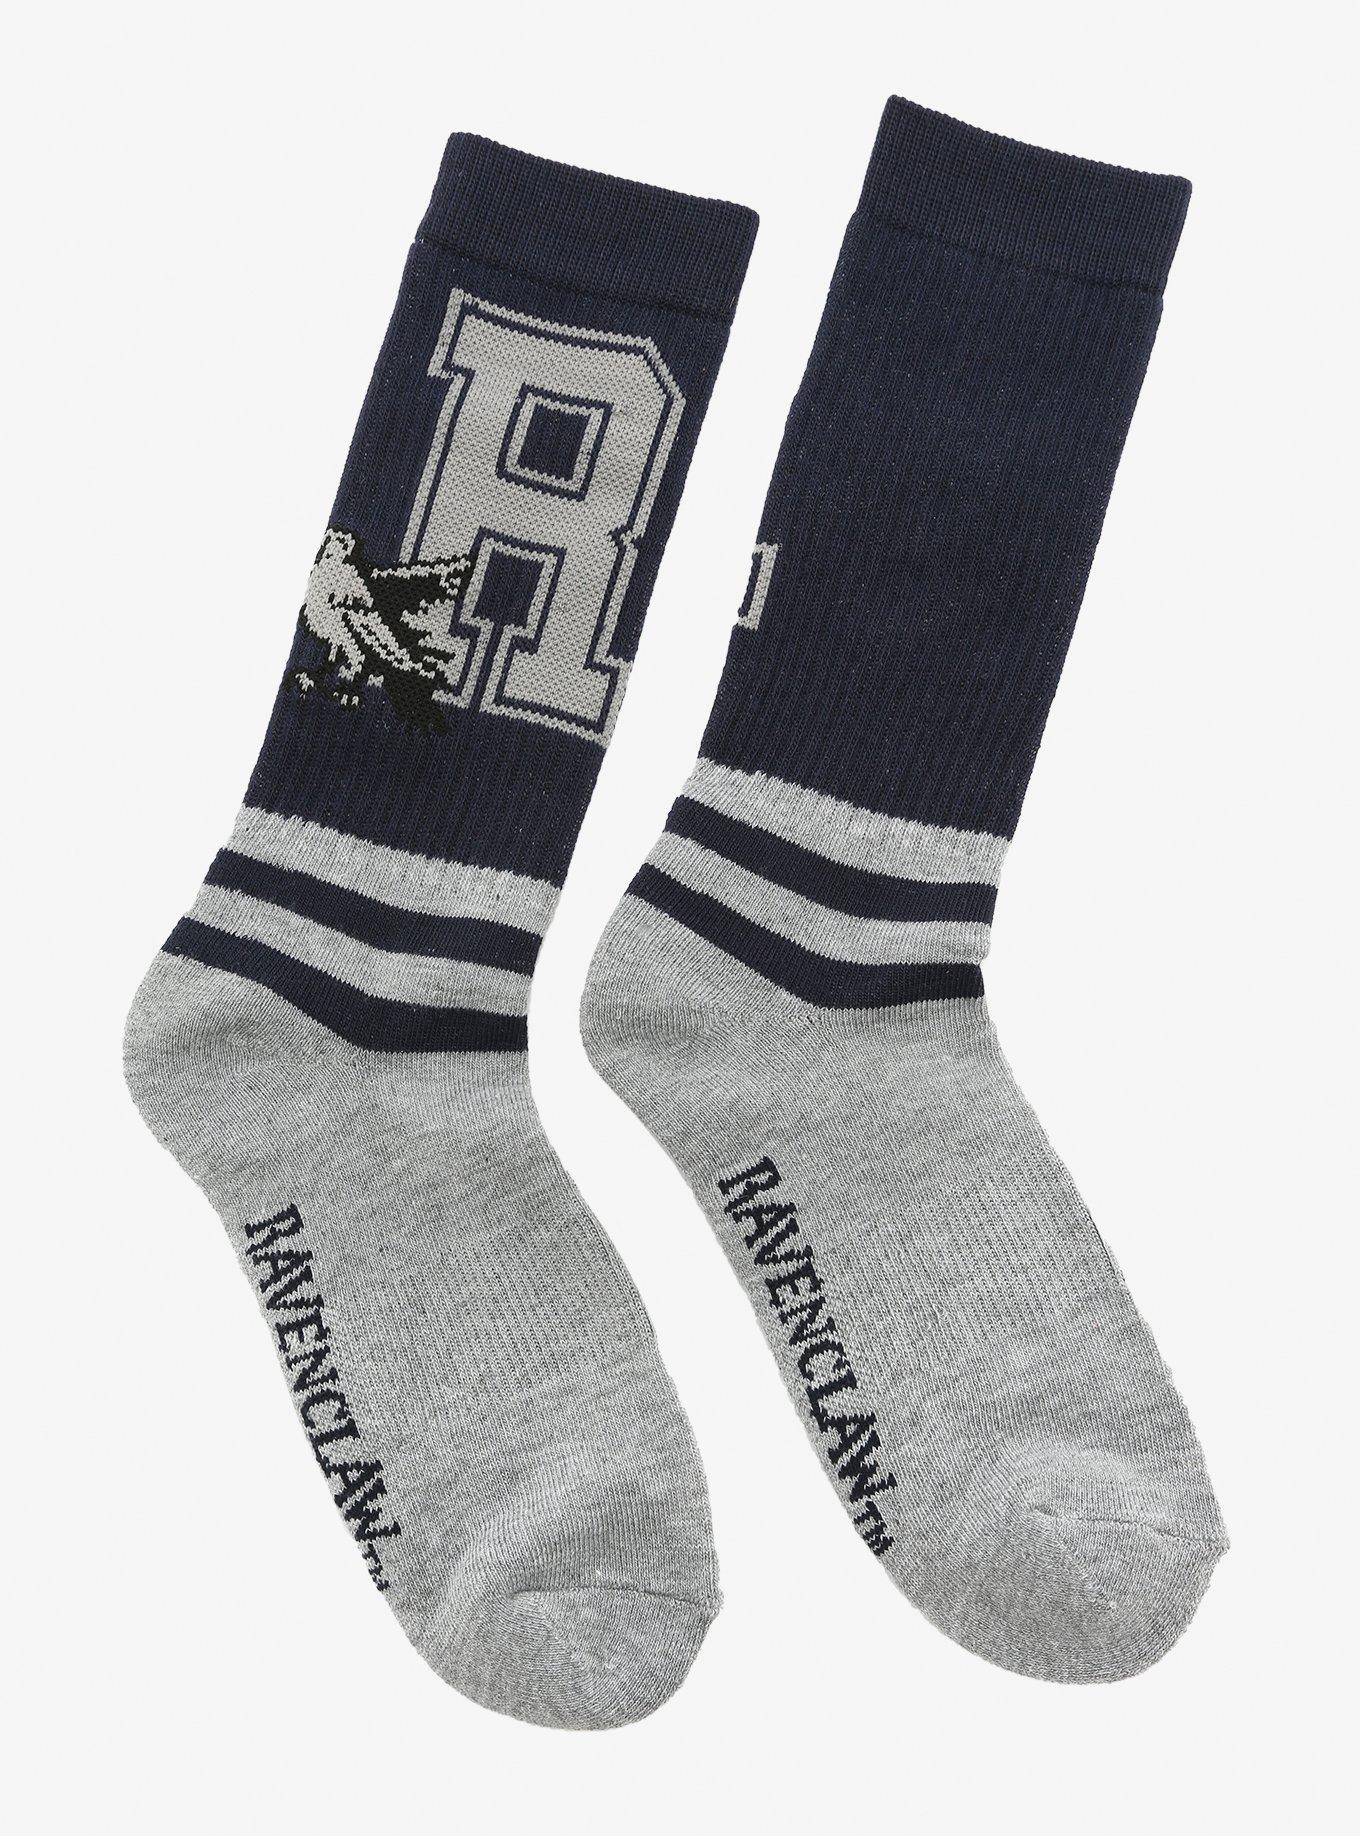 Harry Potter Ravcenclaw Collegiate Crew Socks - BoxLunch Exclusive, , alternate